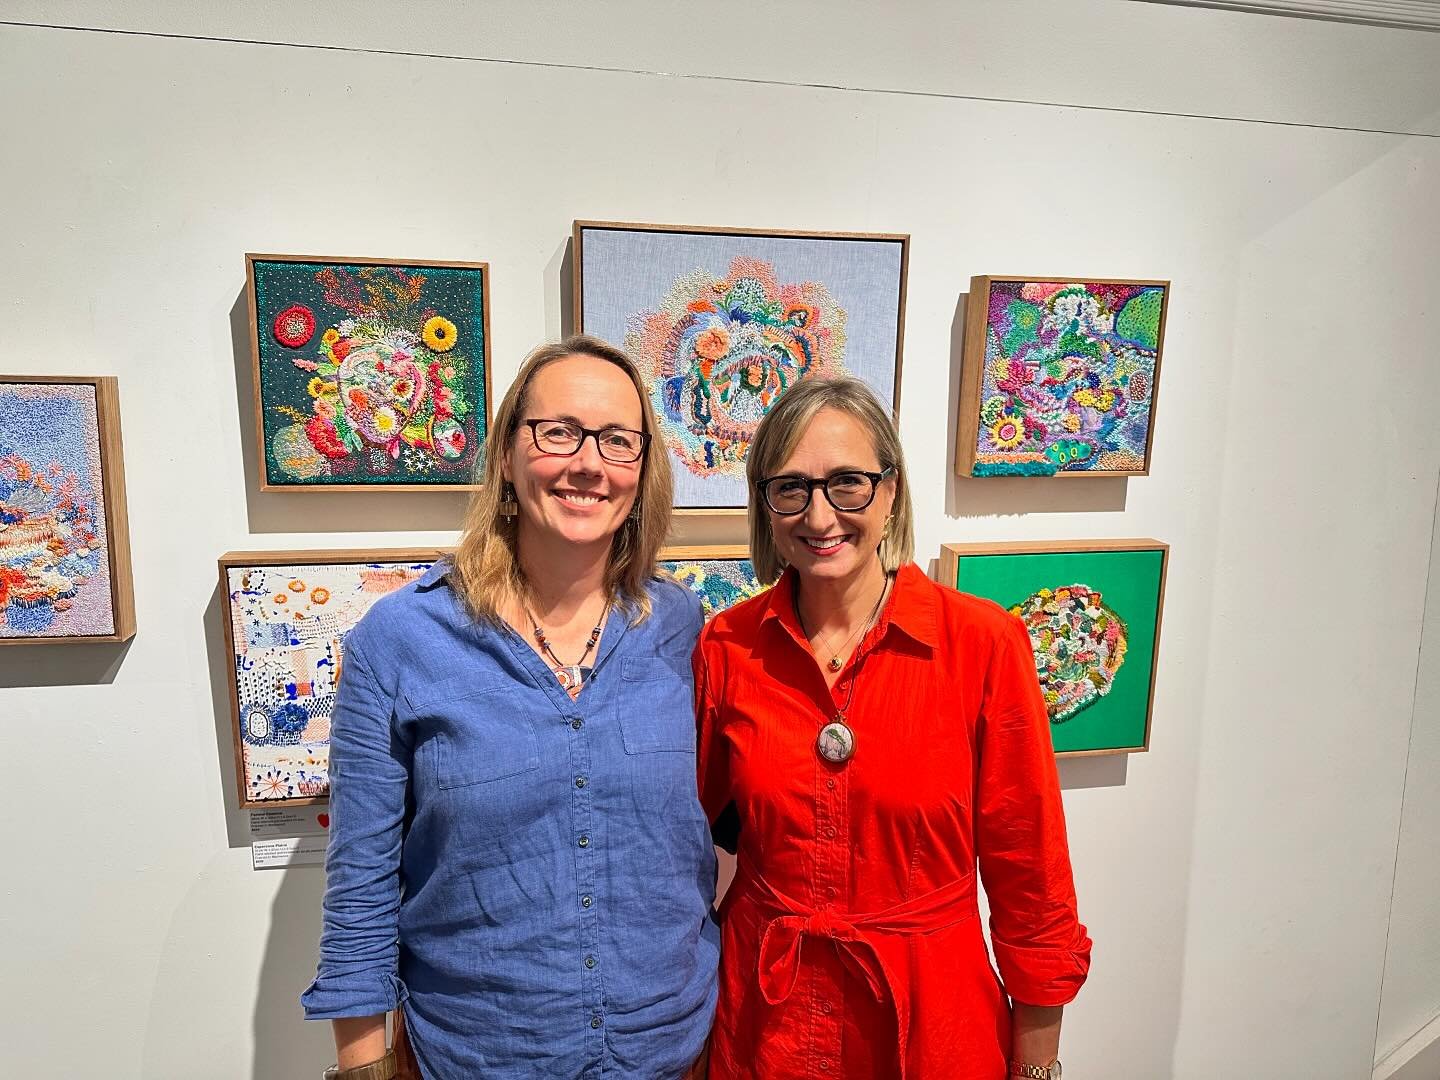 Alissa &amp; I at our opening of FORESTS &amp; FORESHORES tonight at The Corner Gallery, Stanmore. 

Thank you to all of you who came to visit us today and attend our opening this evening. Heartfelt thank you&rsquo;s for all your beautiful words, rea